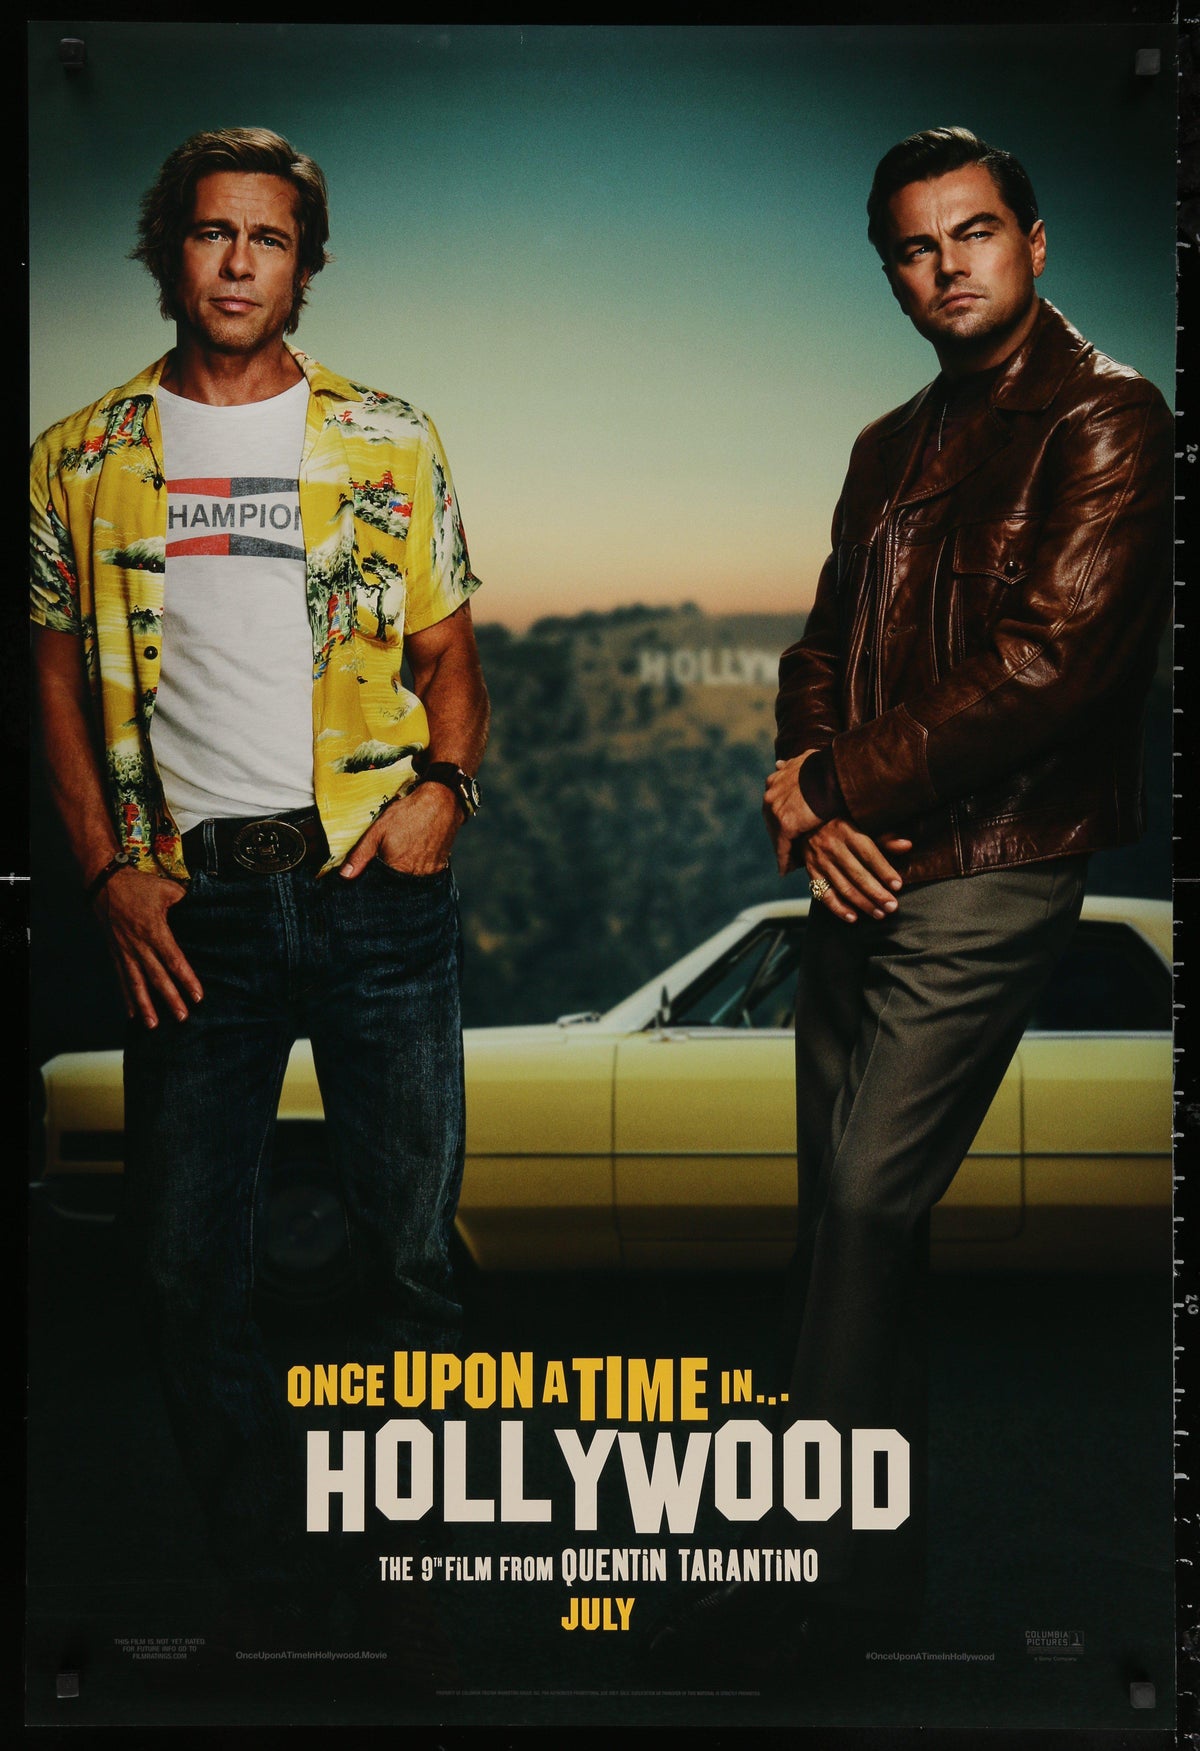 Once Upon a Time In Hollywood 1 Sheet (27x41) Original Vintage Movie Poster